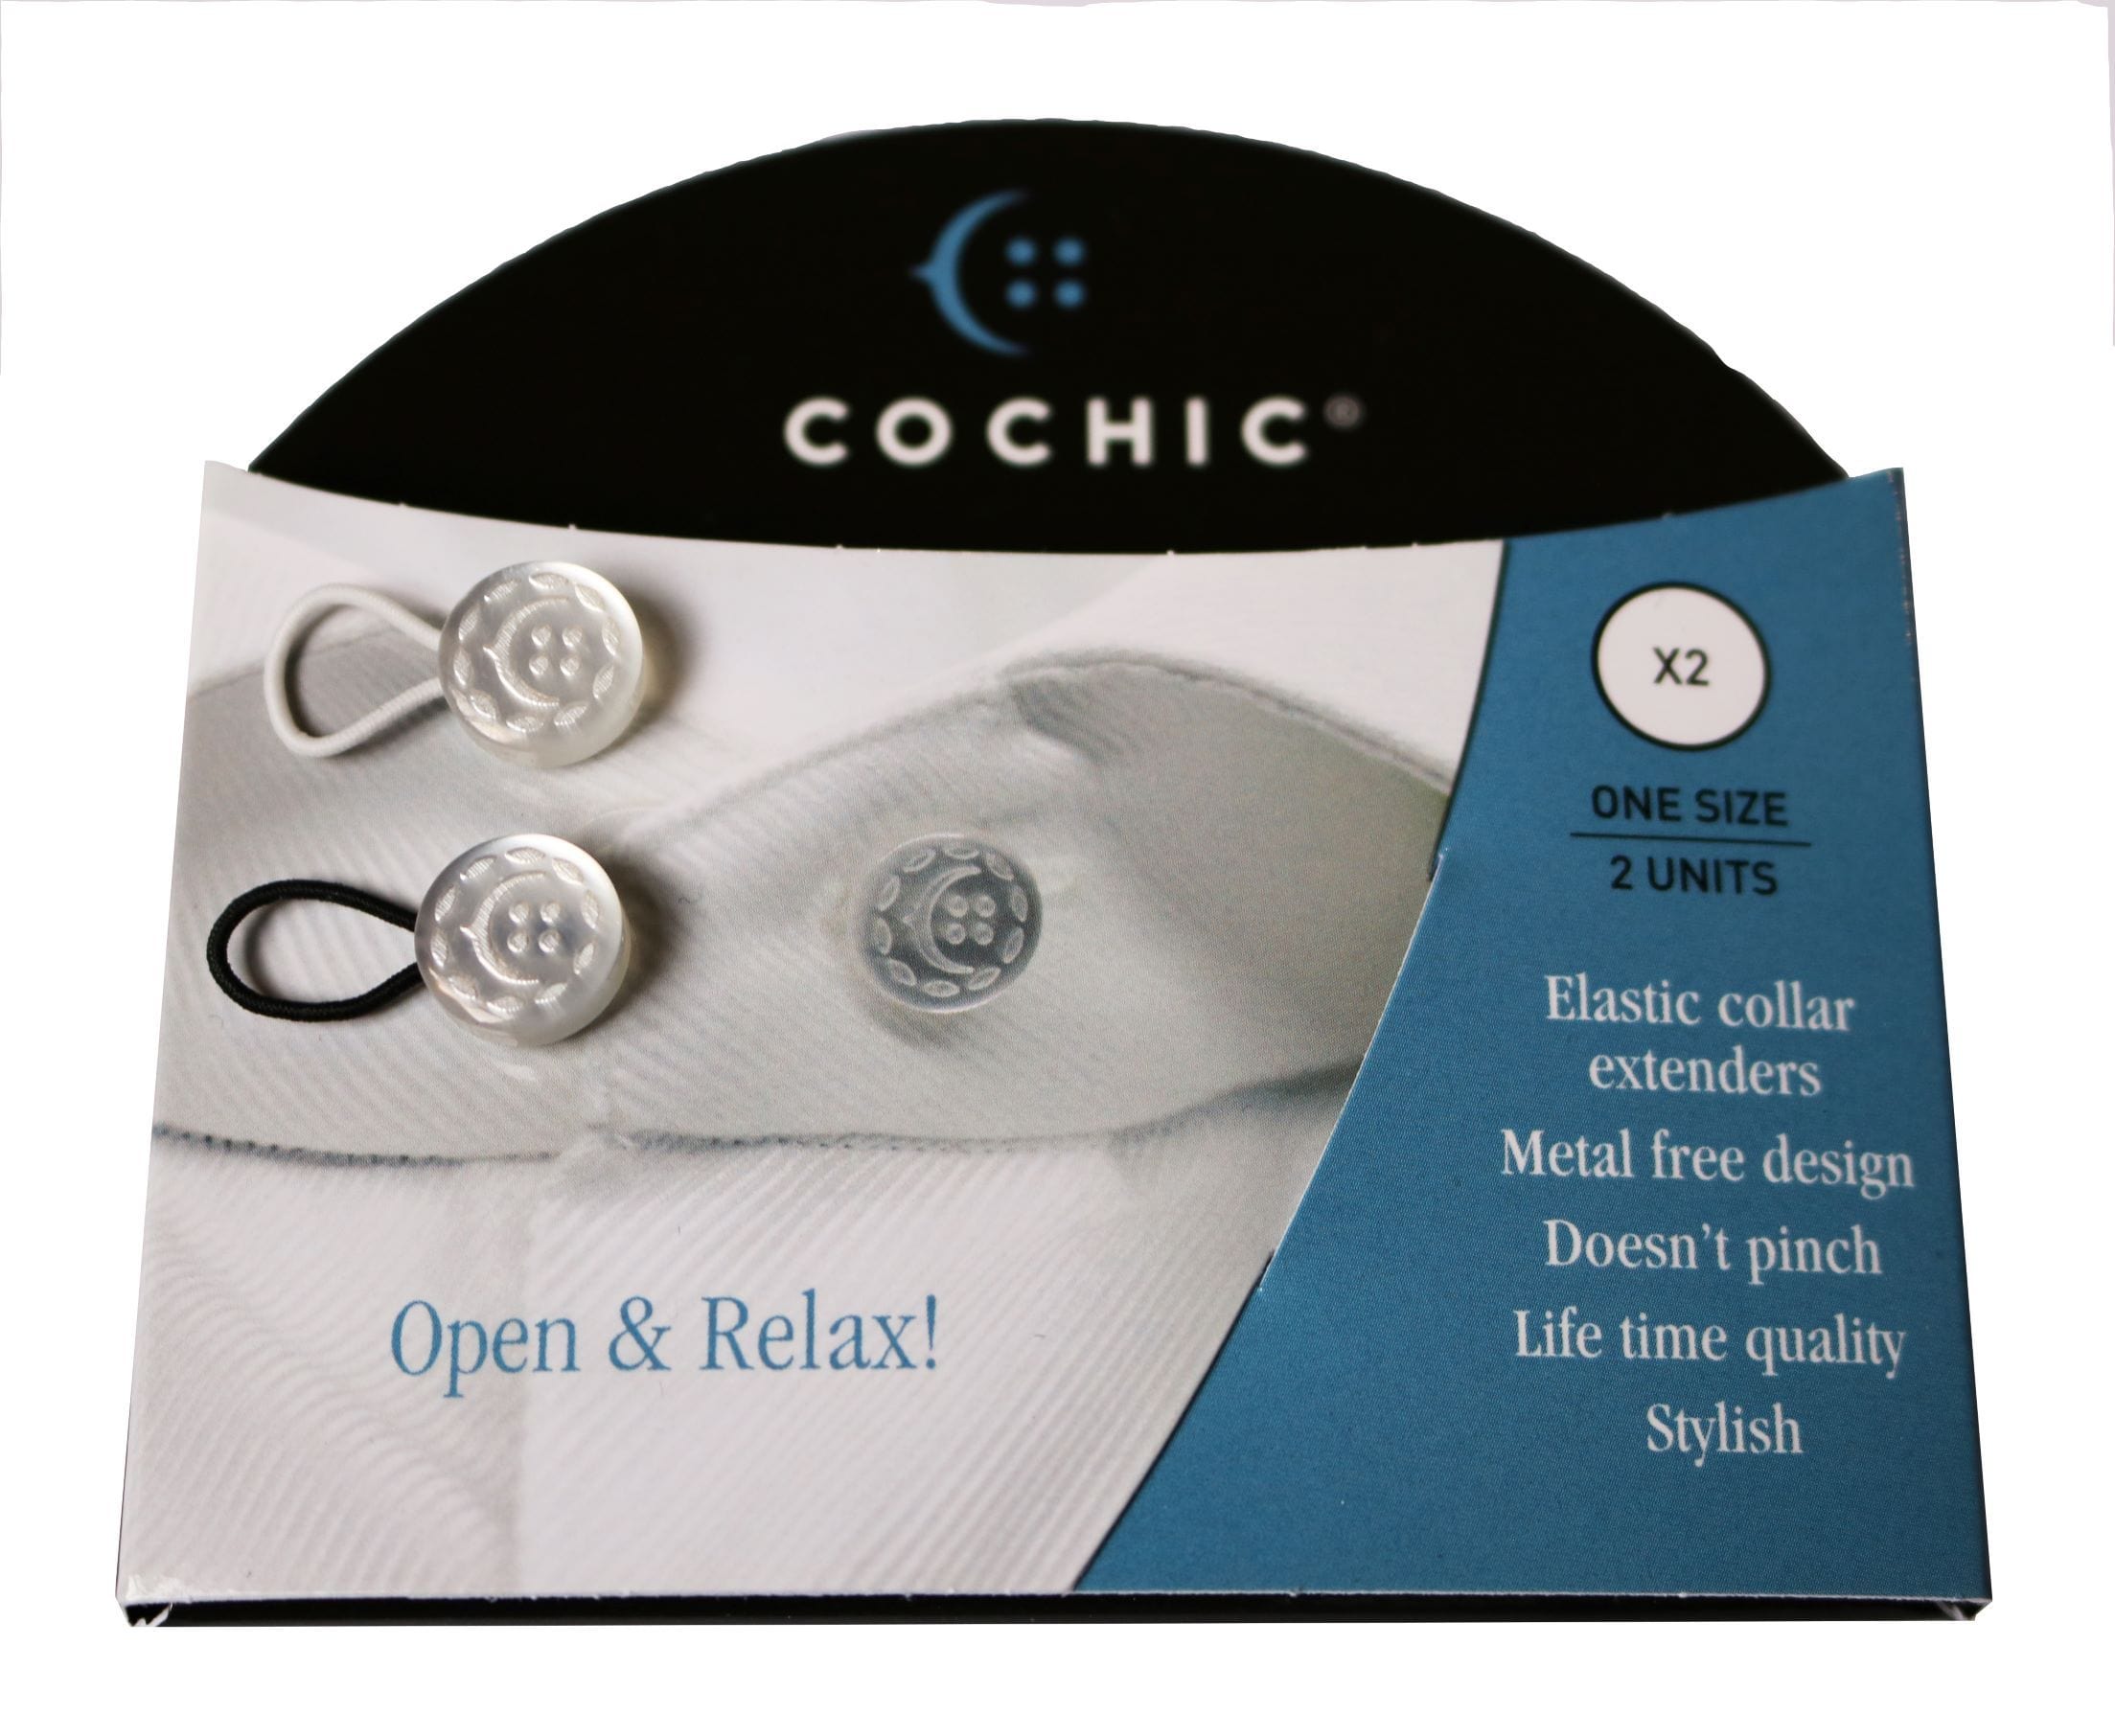 Package of the 2 units white shirt collar extender 